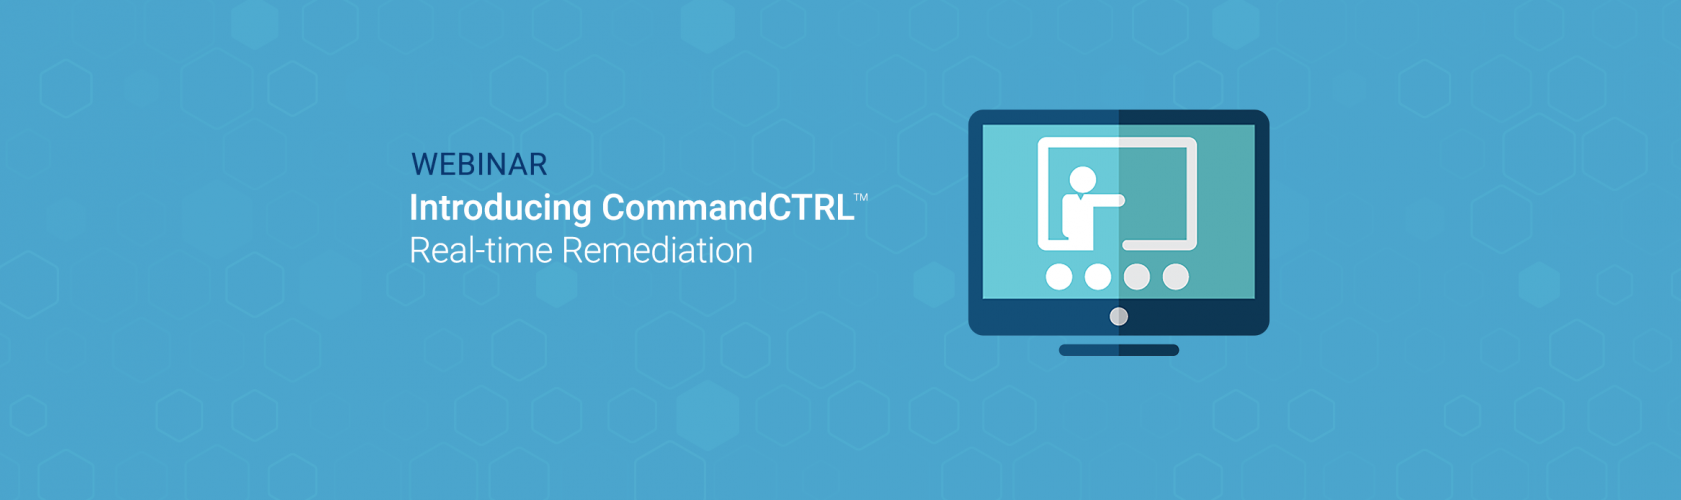 Webinar – Introducing CommandCTRL Real-time Remediation